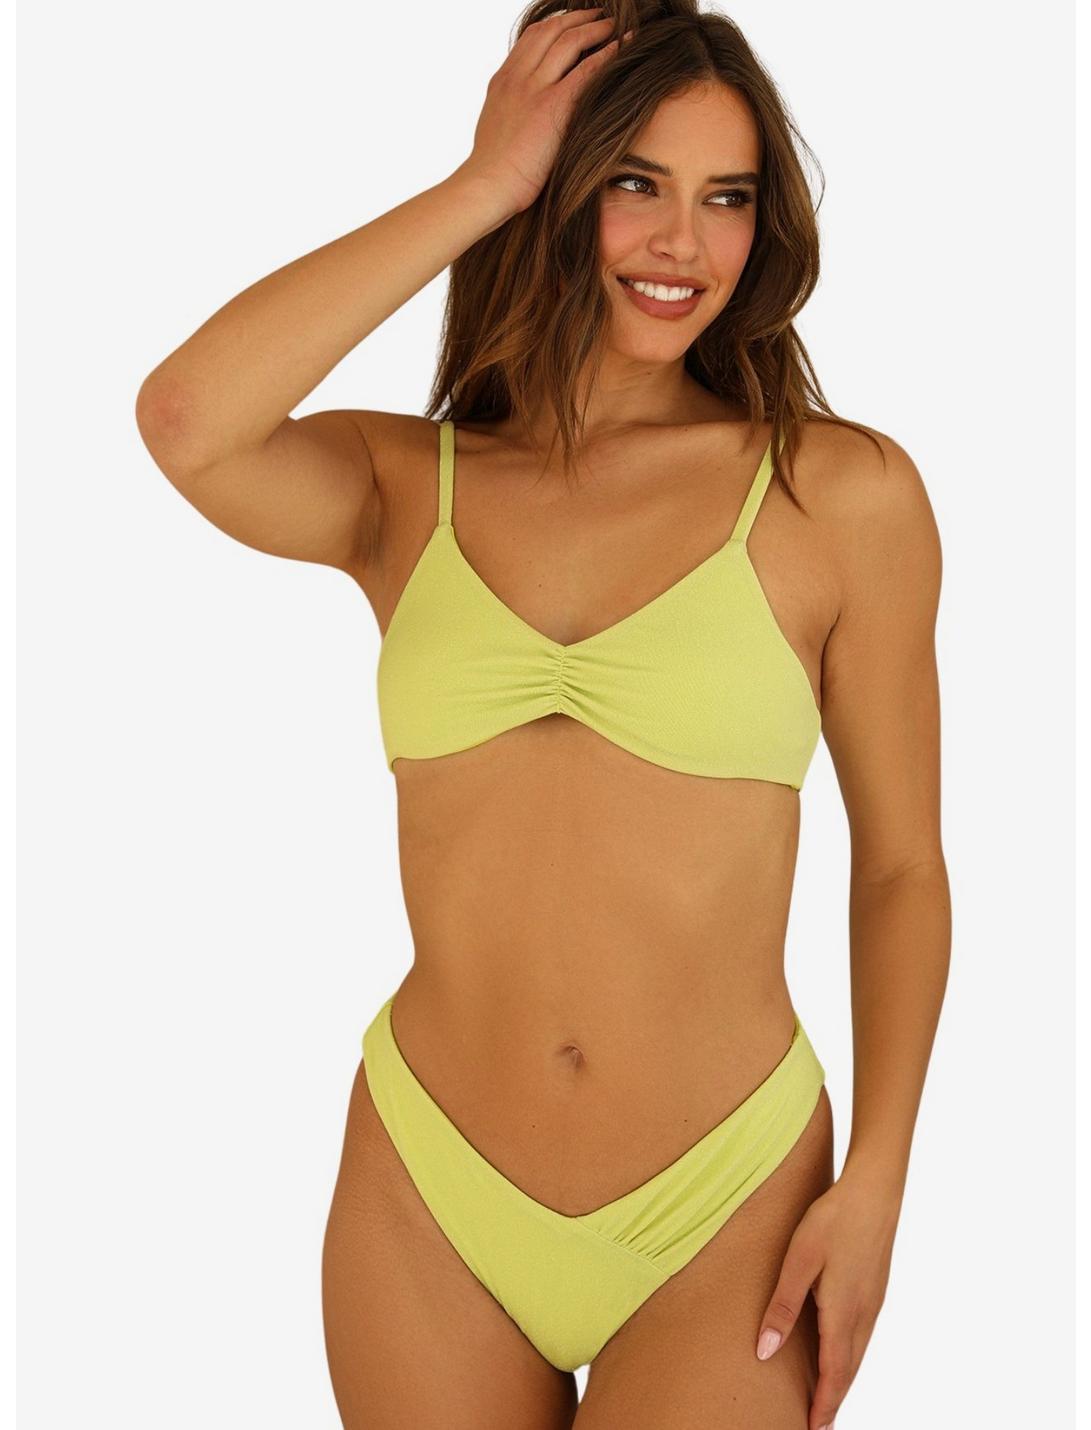 Dippin' Daisy's Britney Swim Top Lime Green, GREEN, hi-res